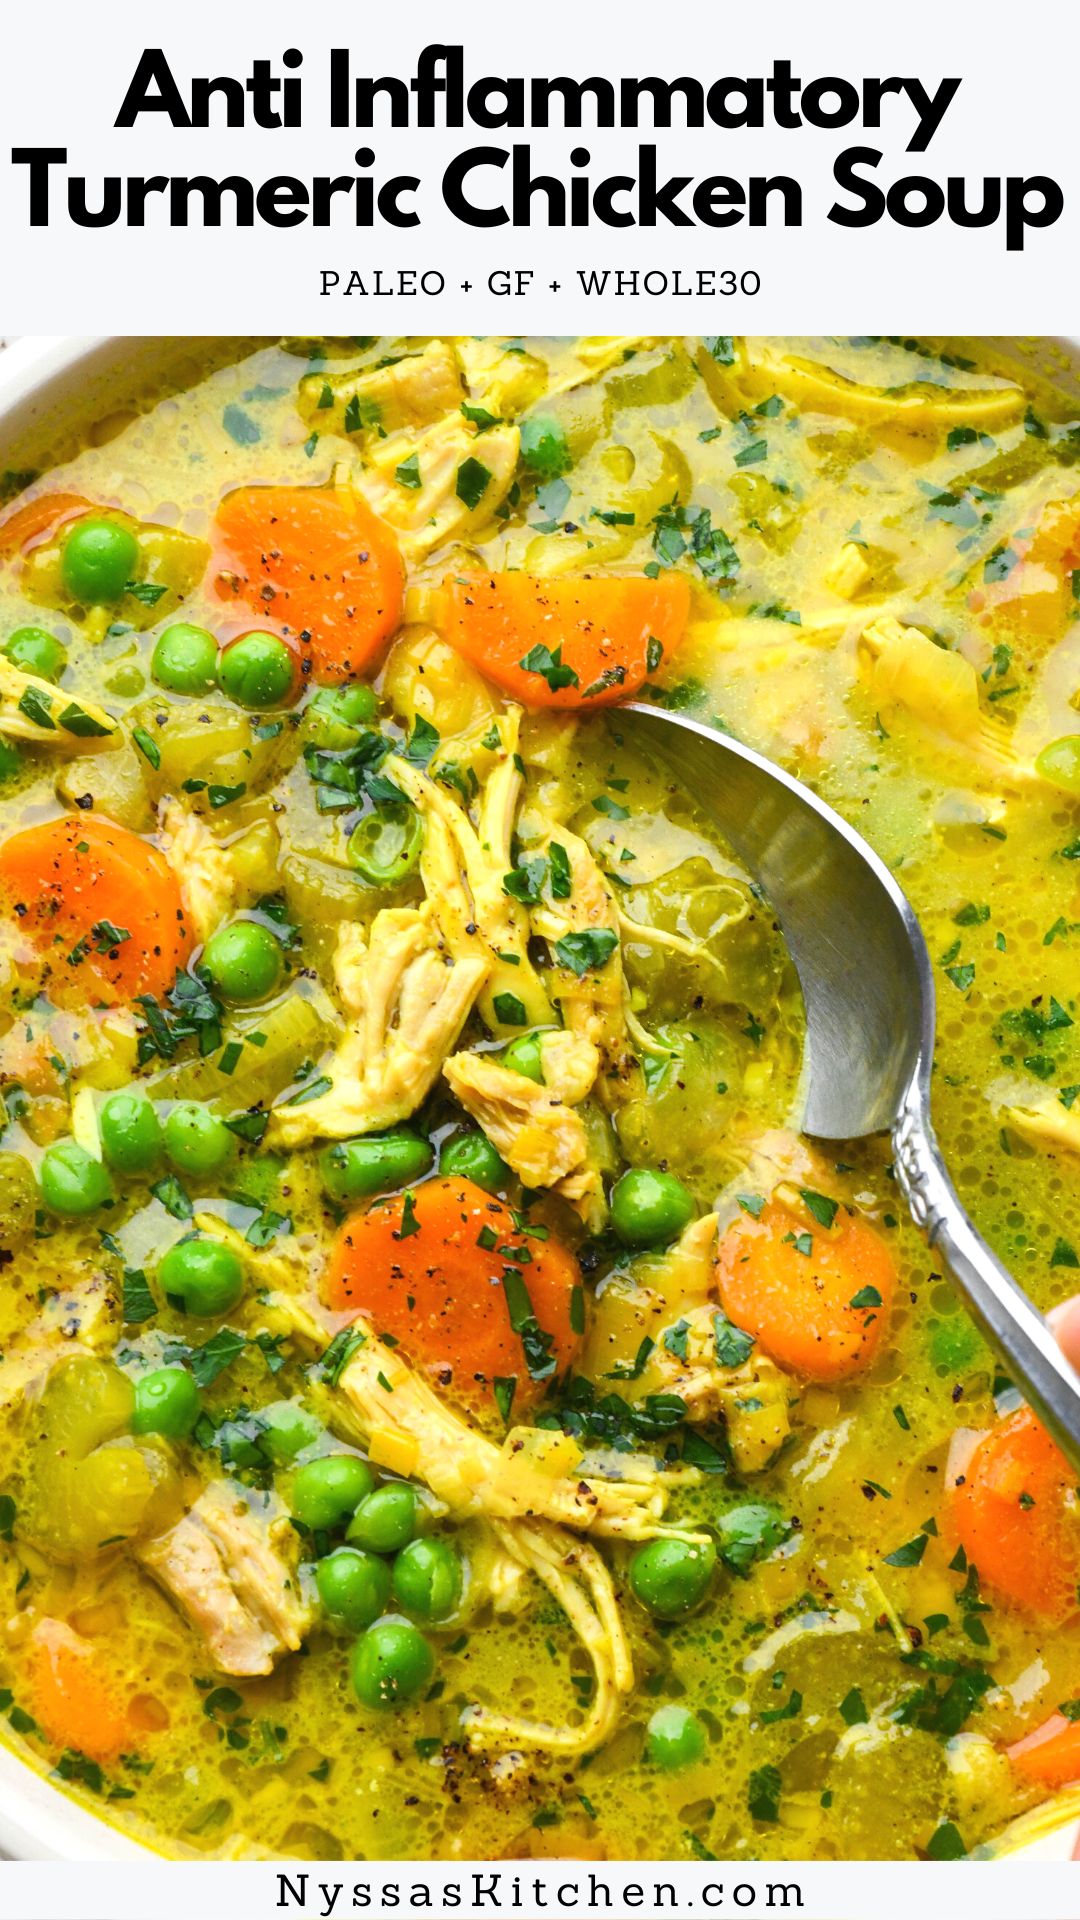 This anti inflammatory turmeric chicken soup is made in one pot with leeks, onions, carrots, celery, peas, chicken, chicken broth, coconut milk, and flavorful spices. It is packed with nutrients, and perfect for meal prep or family dinner. The best way to warm up with when you need some homemade nourishment! Whole30, paleo, gluten free, dairy free.